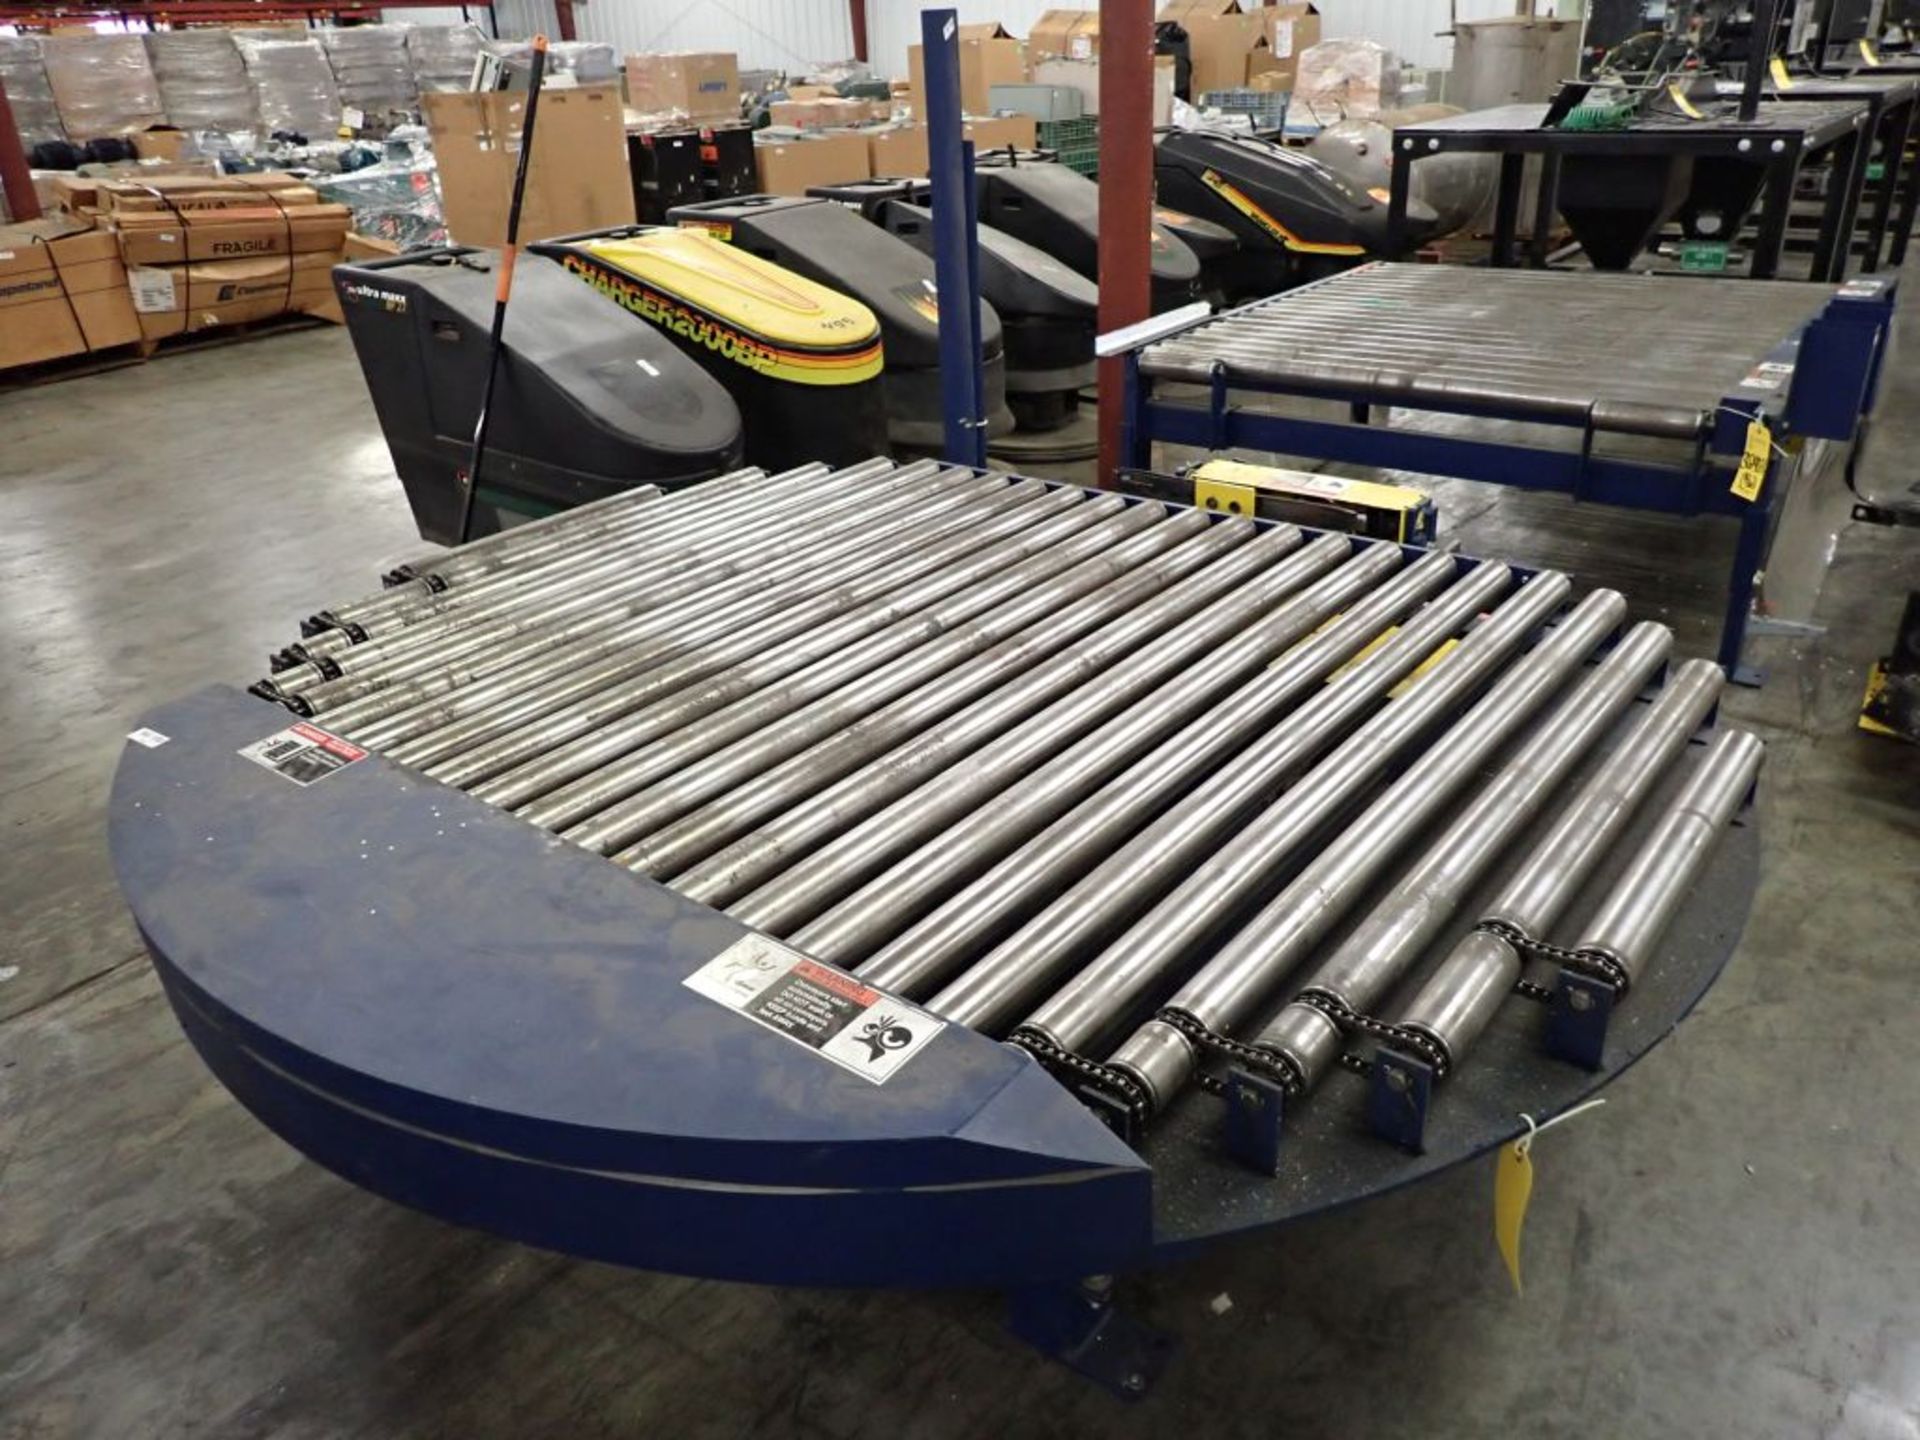 Lantech Pallet Wrapping System with Infeed and Outfeed Conveyor - Image 77 of 99